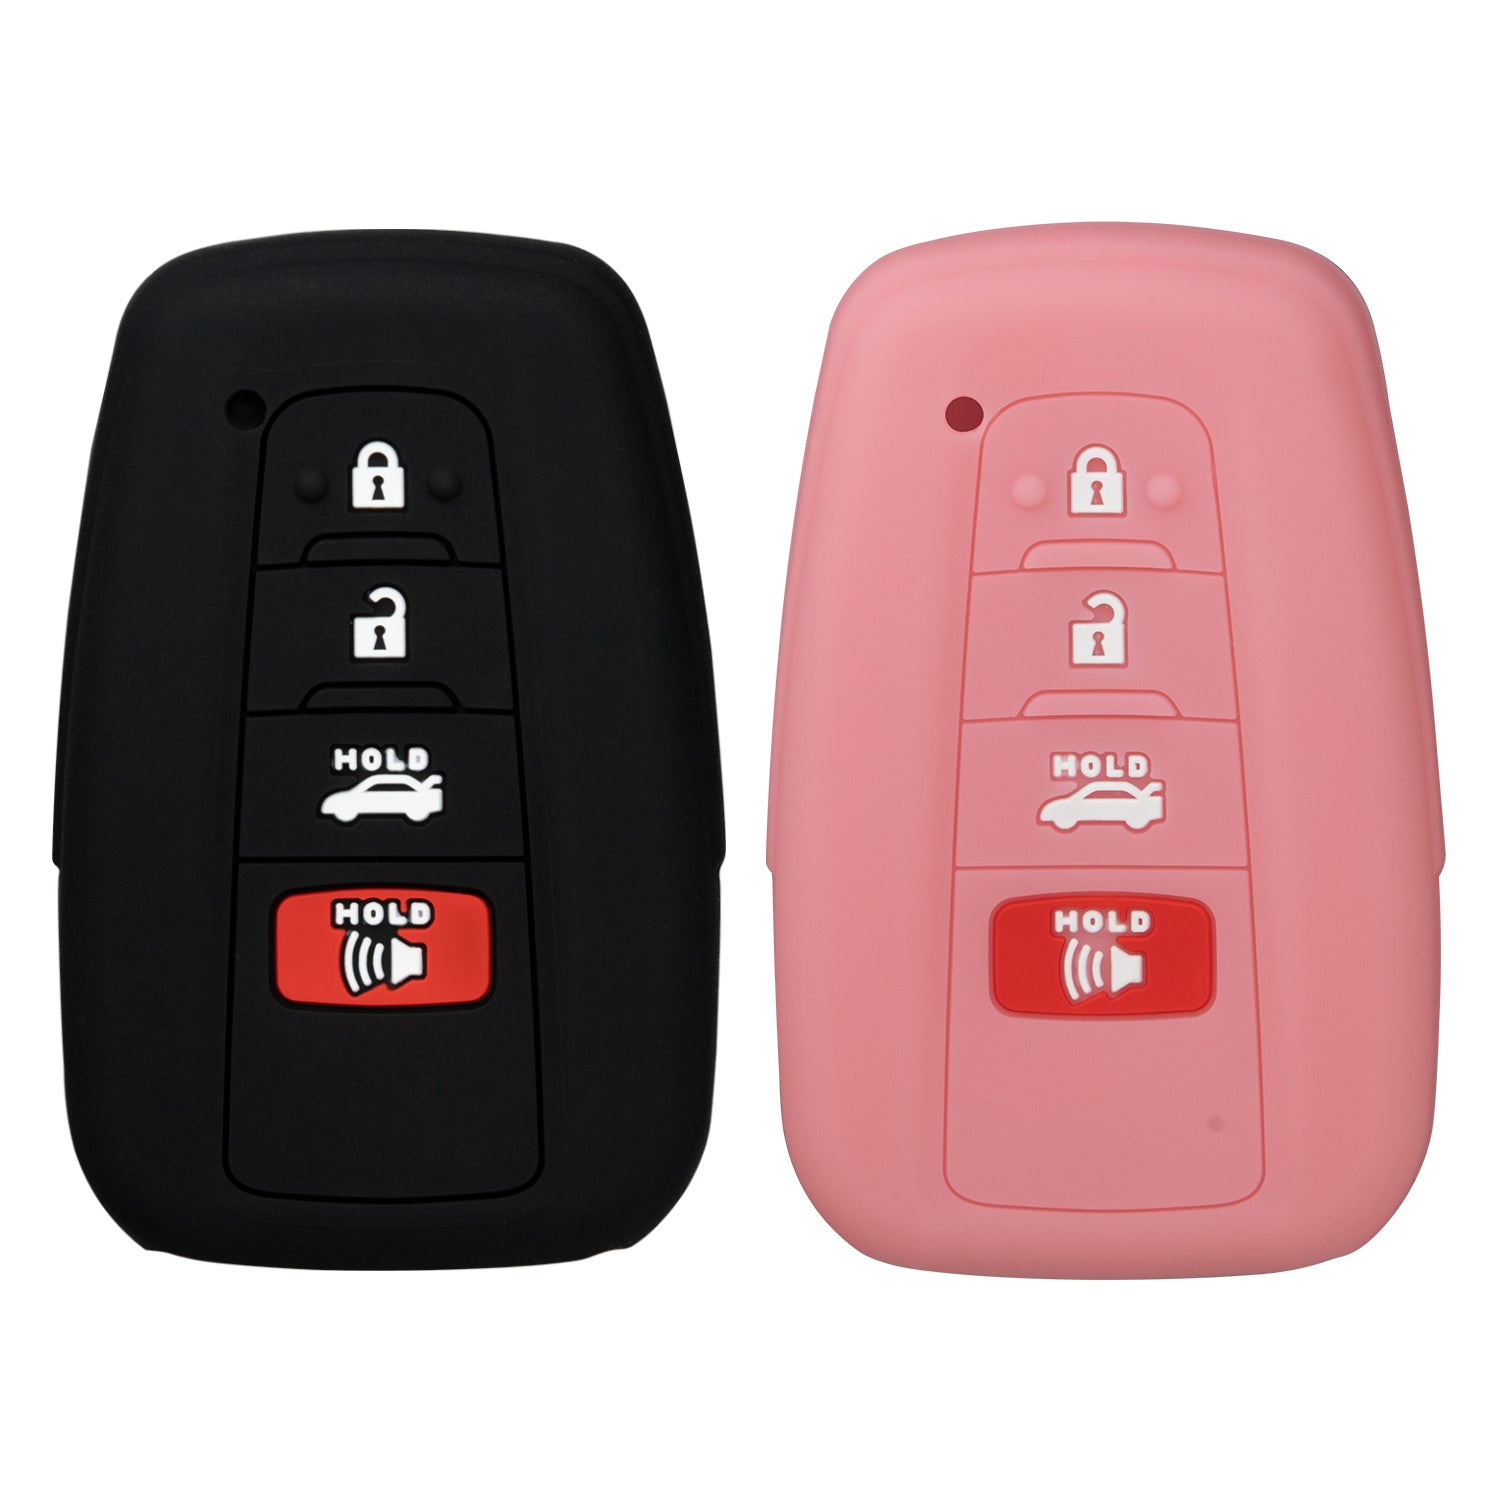 Silicone Case 4 Button Shell for Toyota Smart Proximity Remote Key HYQ14FBE, HYQ14FBC, HYQ14AHP, HYQ14FBN (Black & Pink)